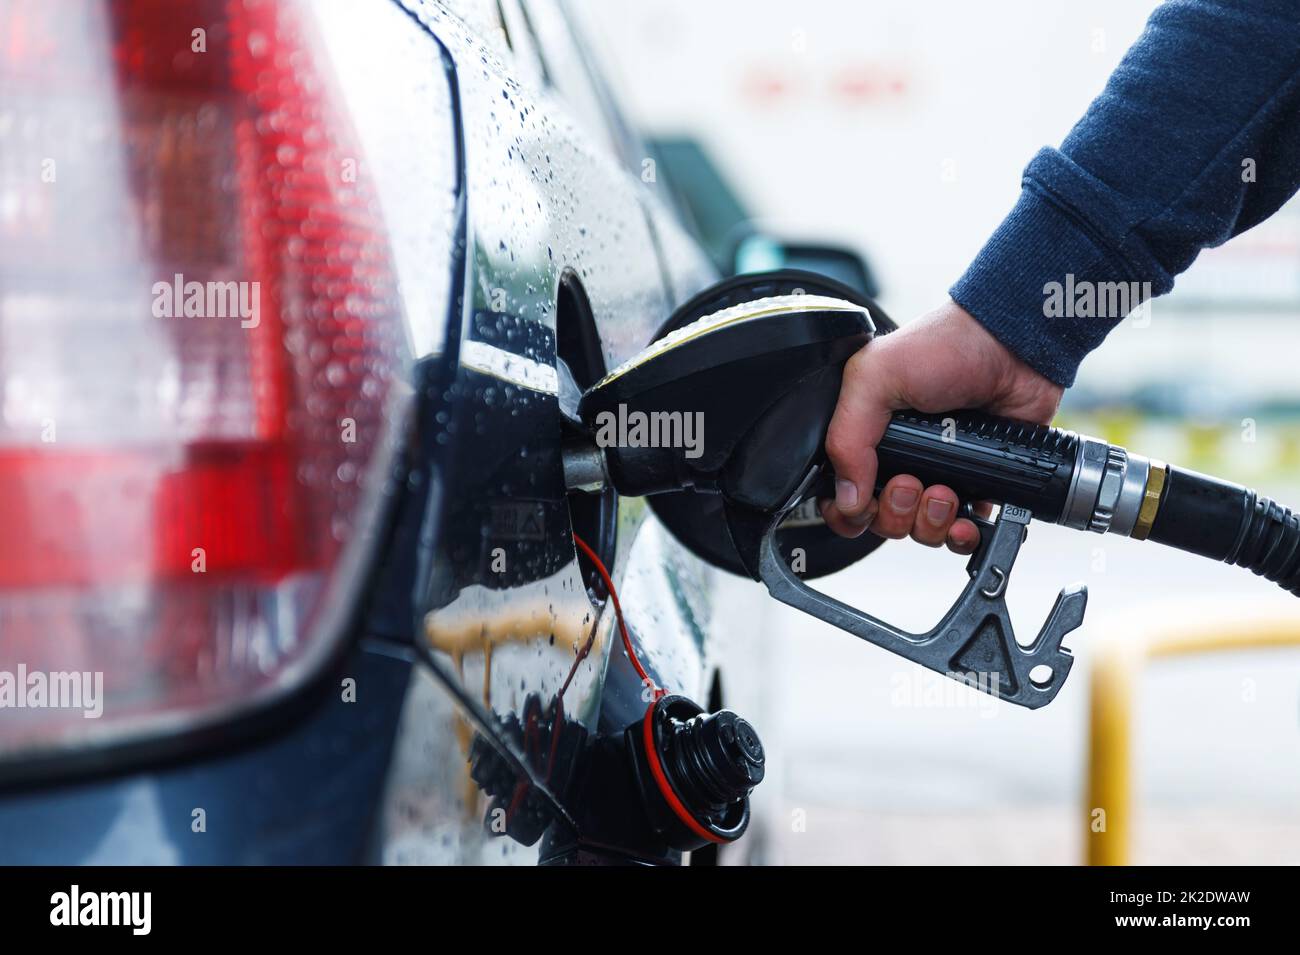 Man is filling tank of his car on the gas station Stock Photo